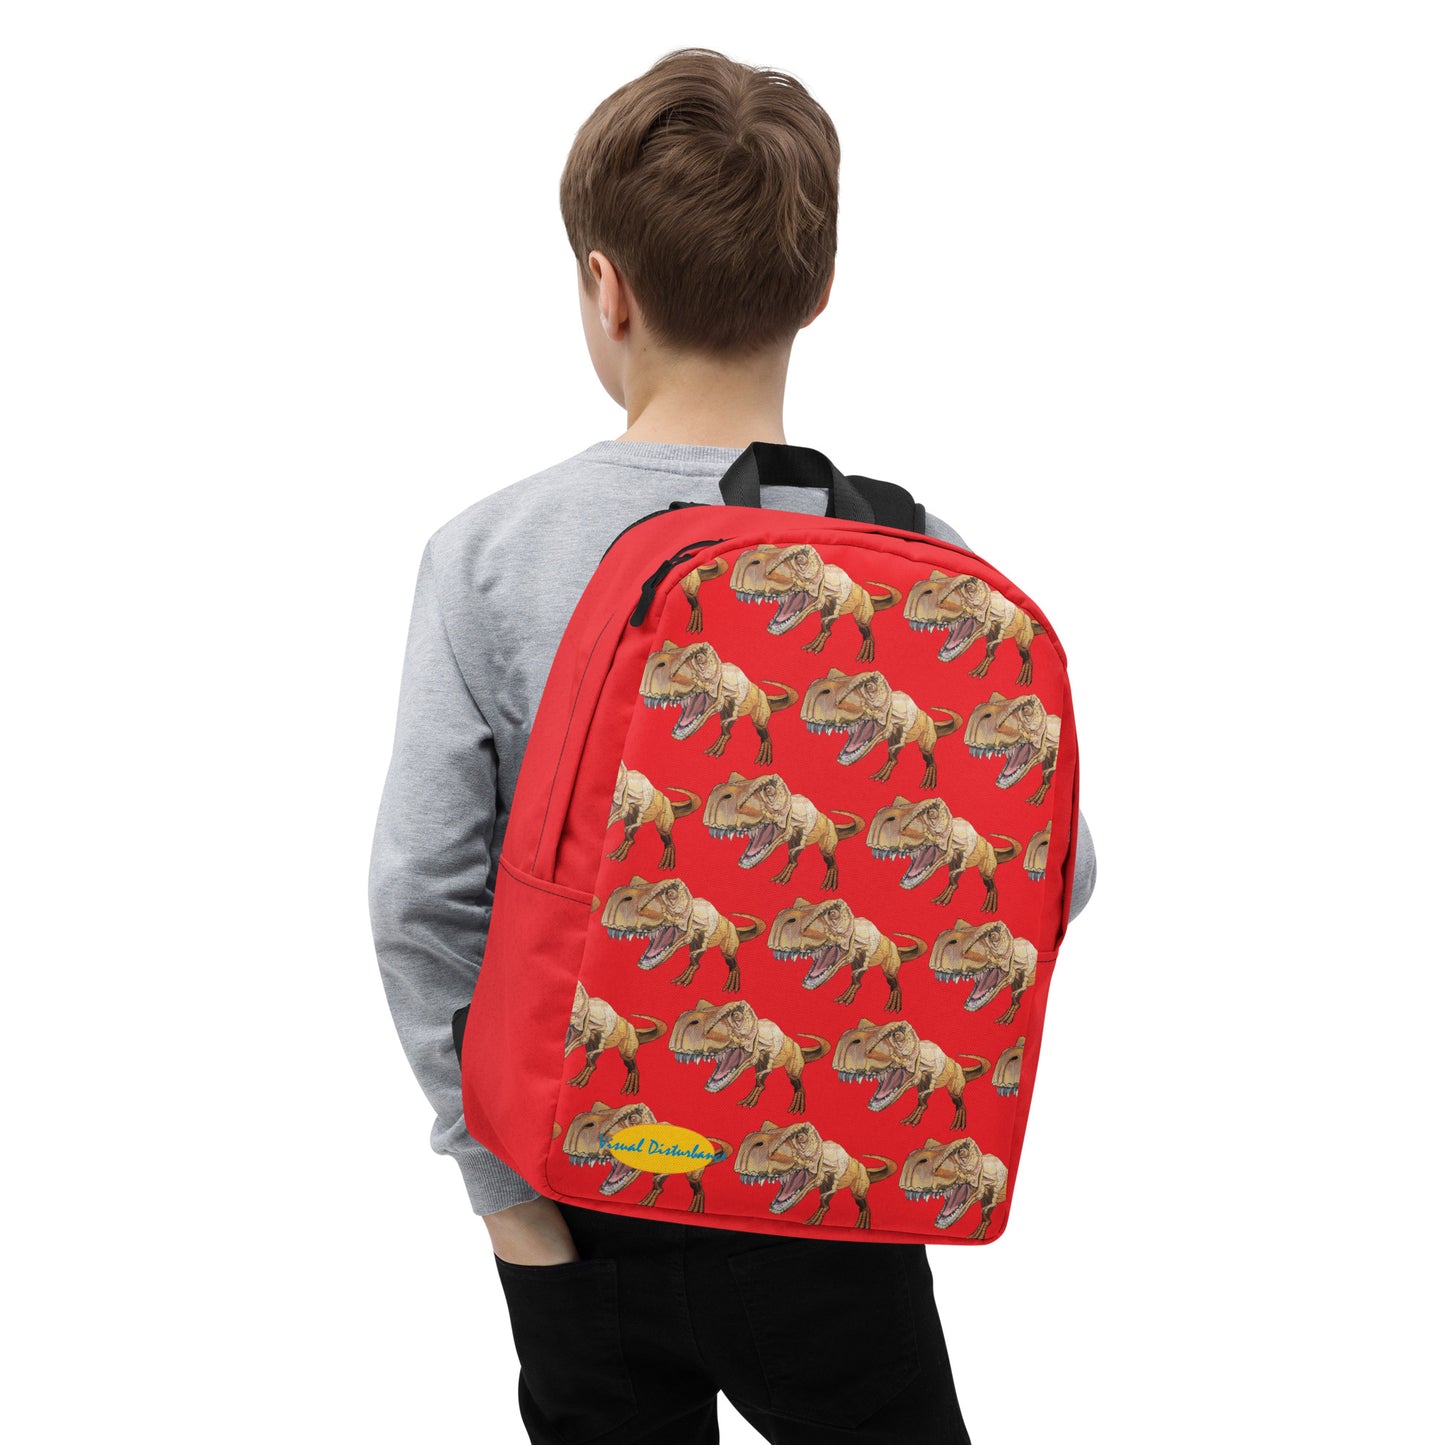 T-Rex in Gold Minimalist Backpack